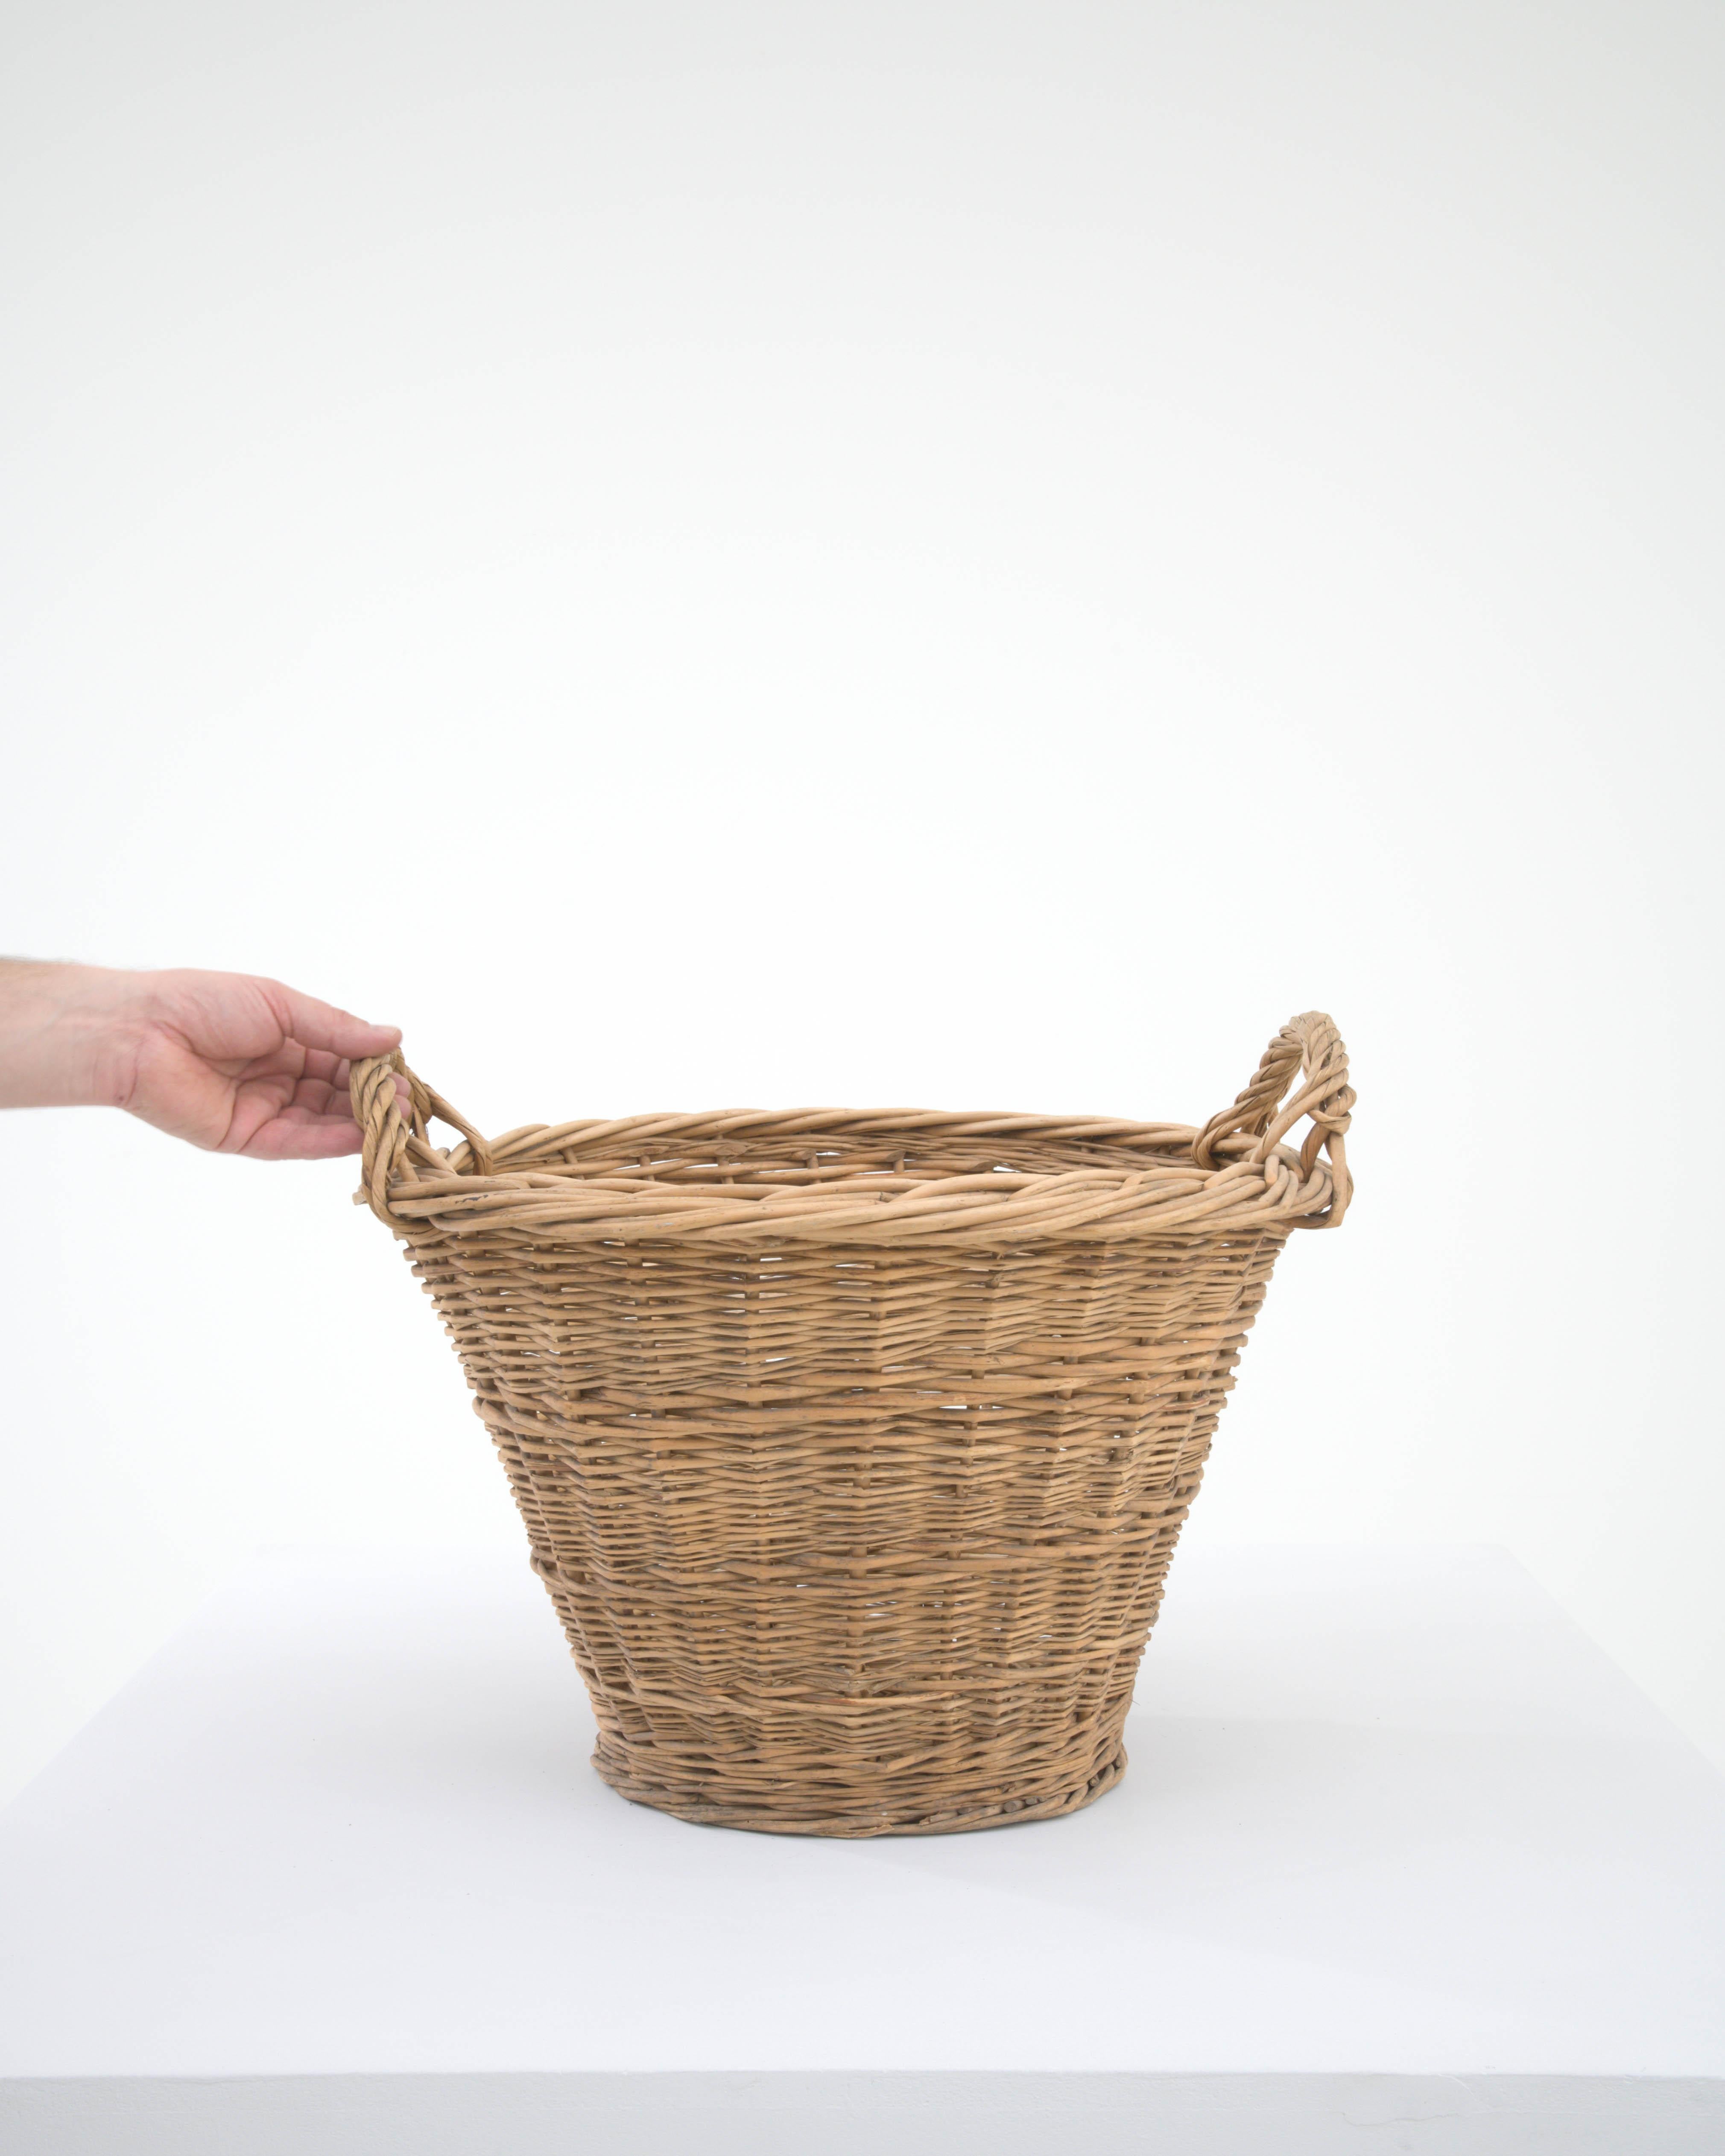 This 20th Century Belgian Wicker Basket is an embodiment of practical beauty, weaving together functionality with the charm of rustic aesthetics. Its robust and curvaceous form offers ample space, perfect for an array of uses, from holding your